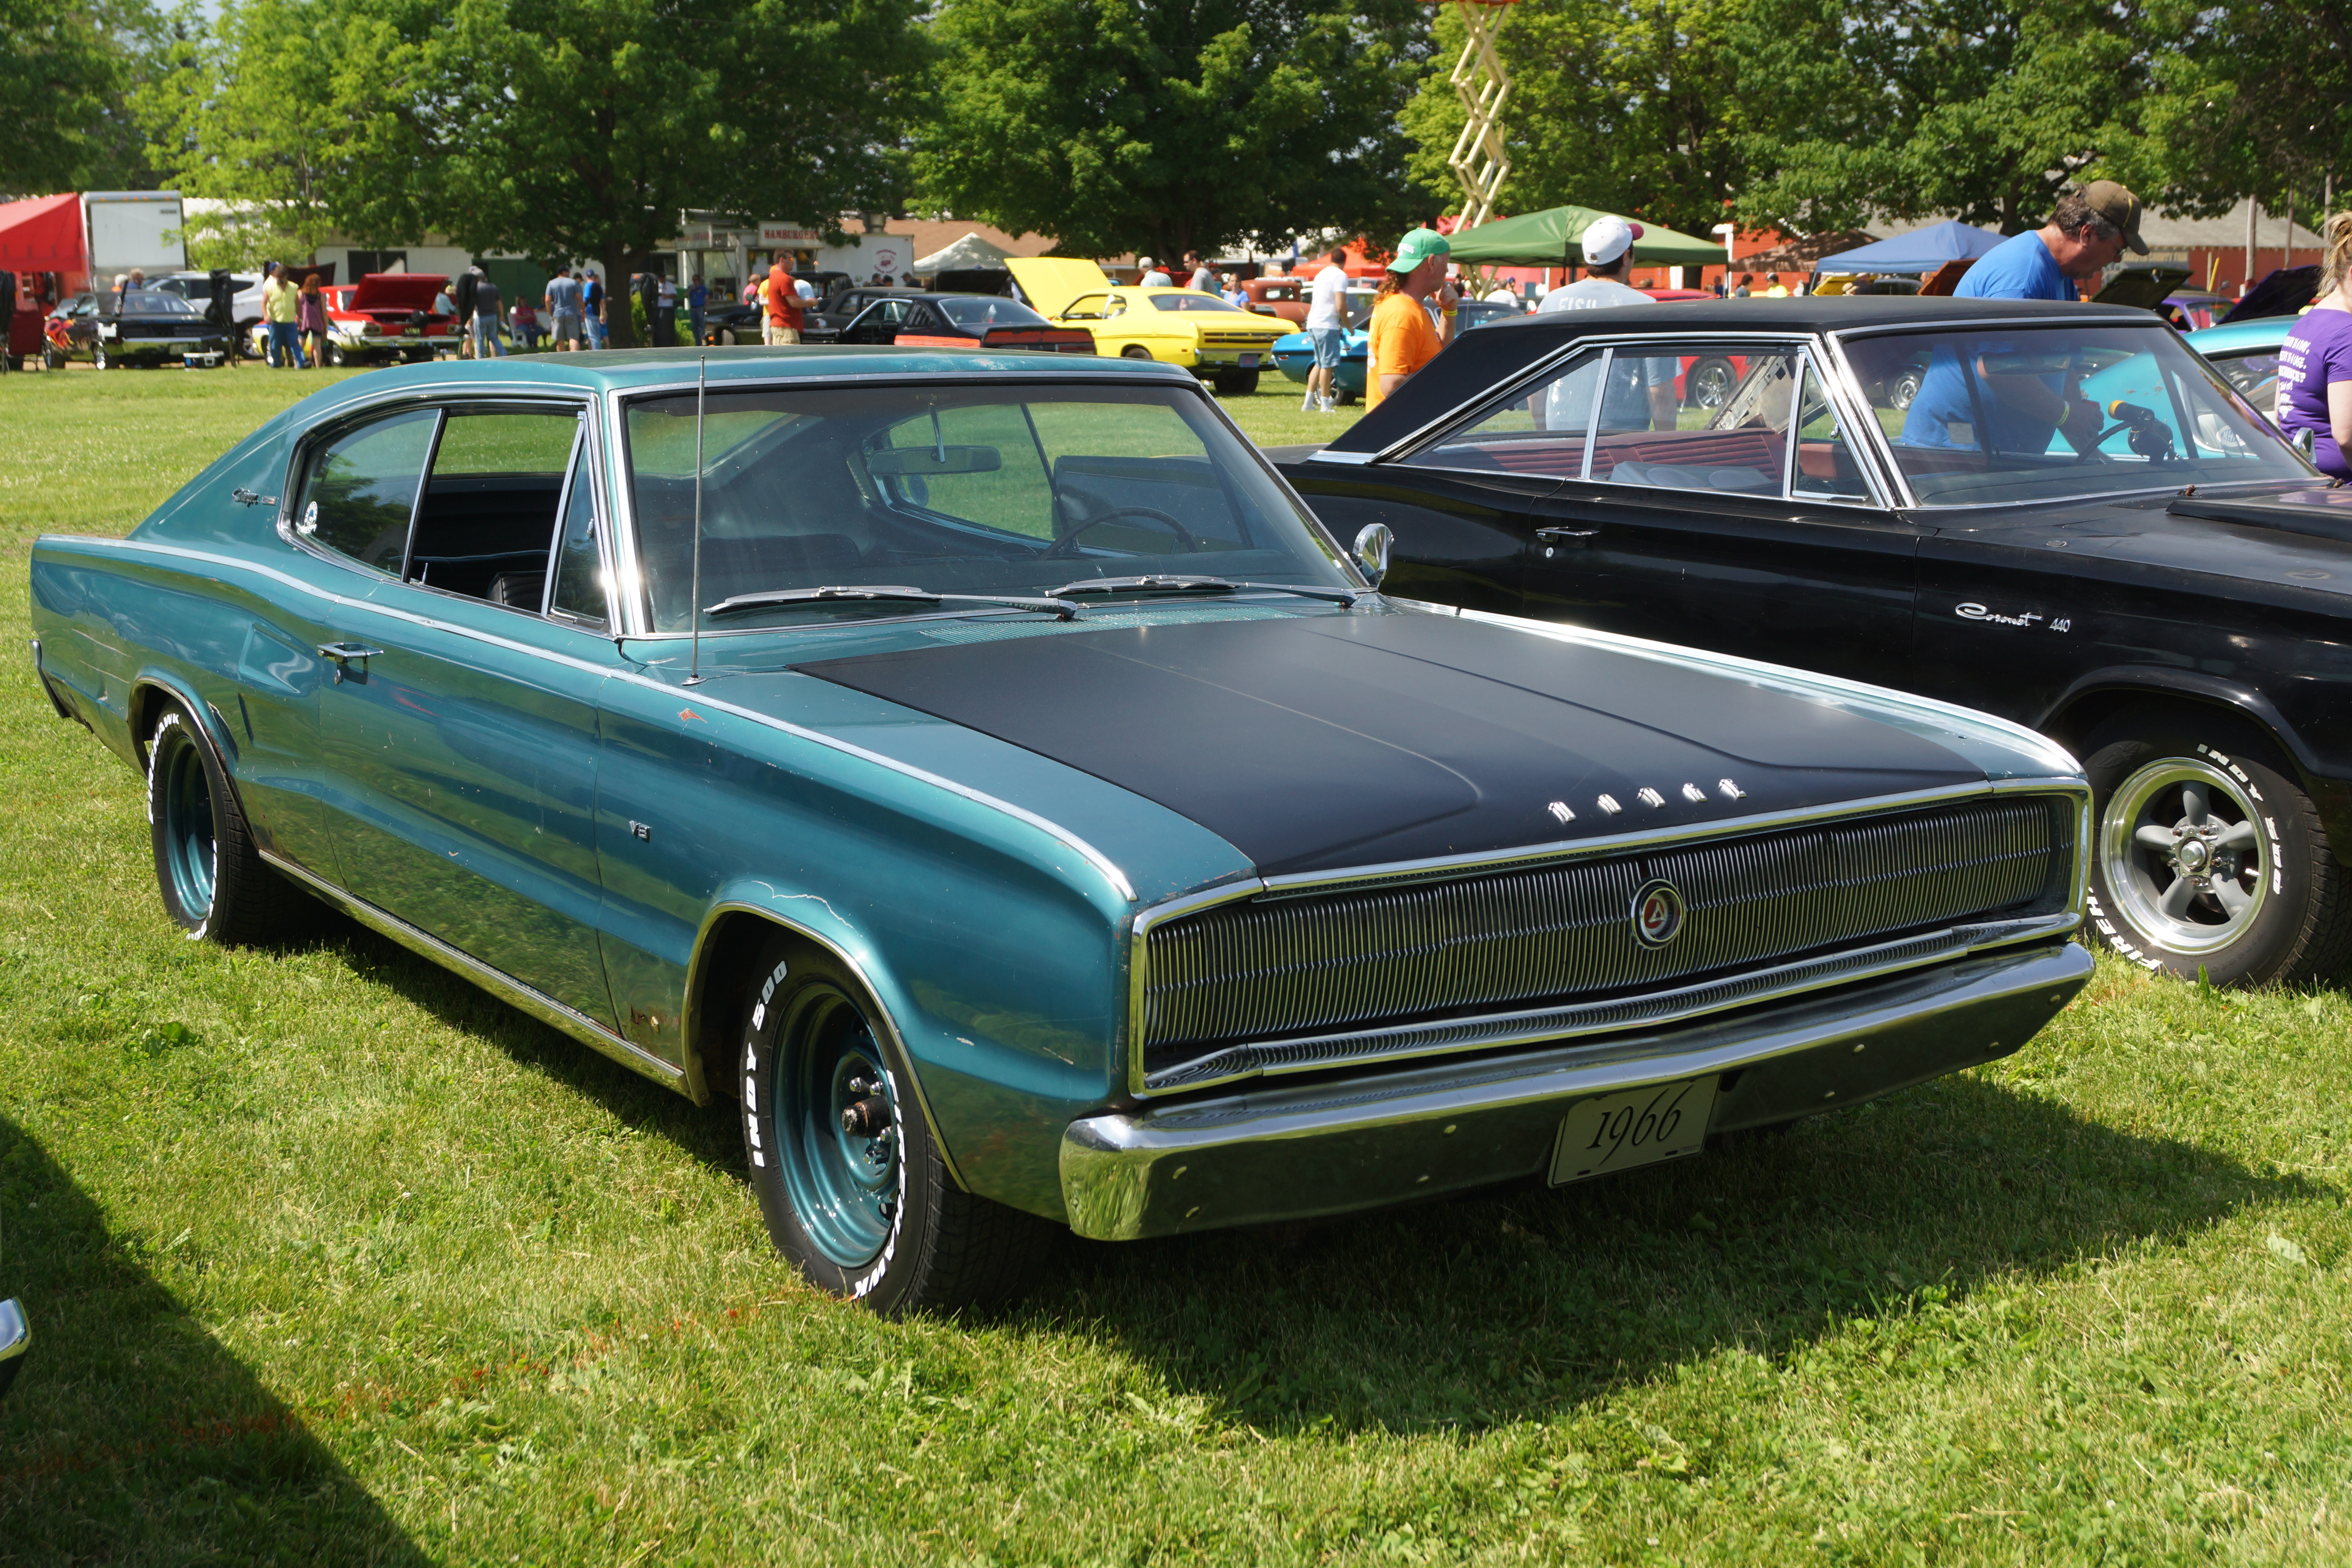 Dodge Charger (1966) - Wikipedia